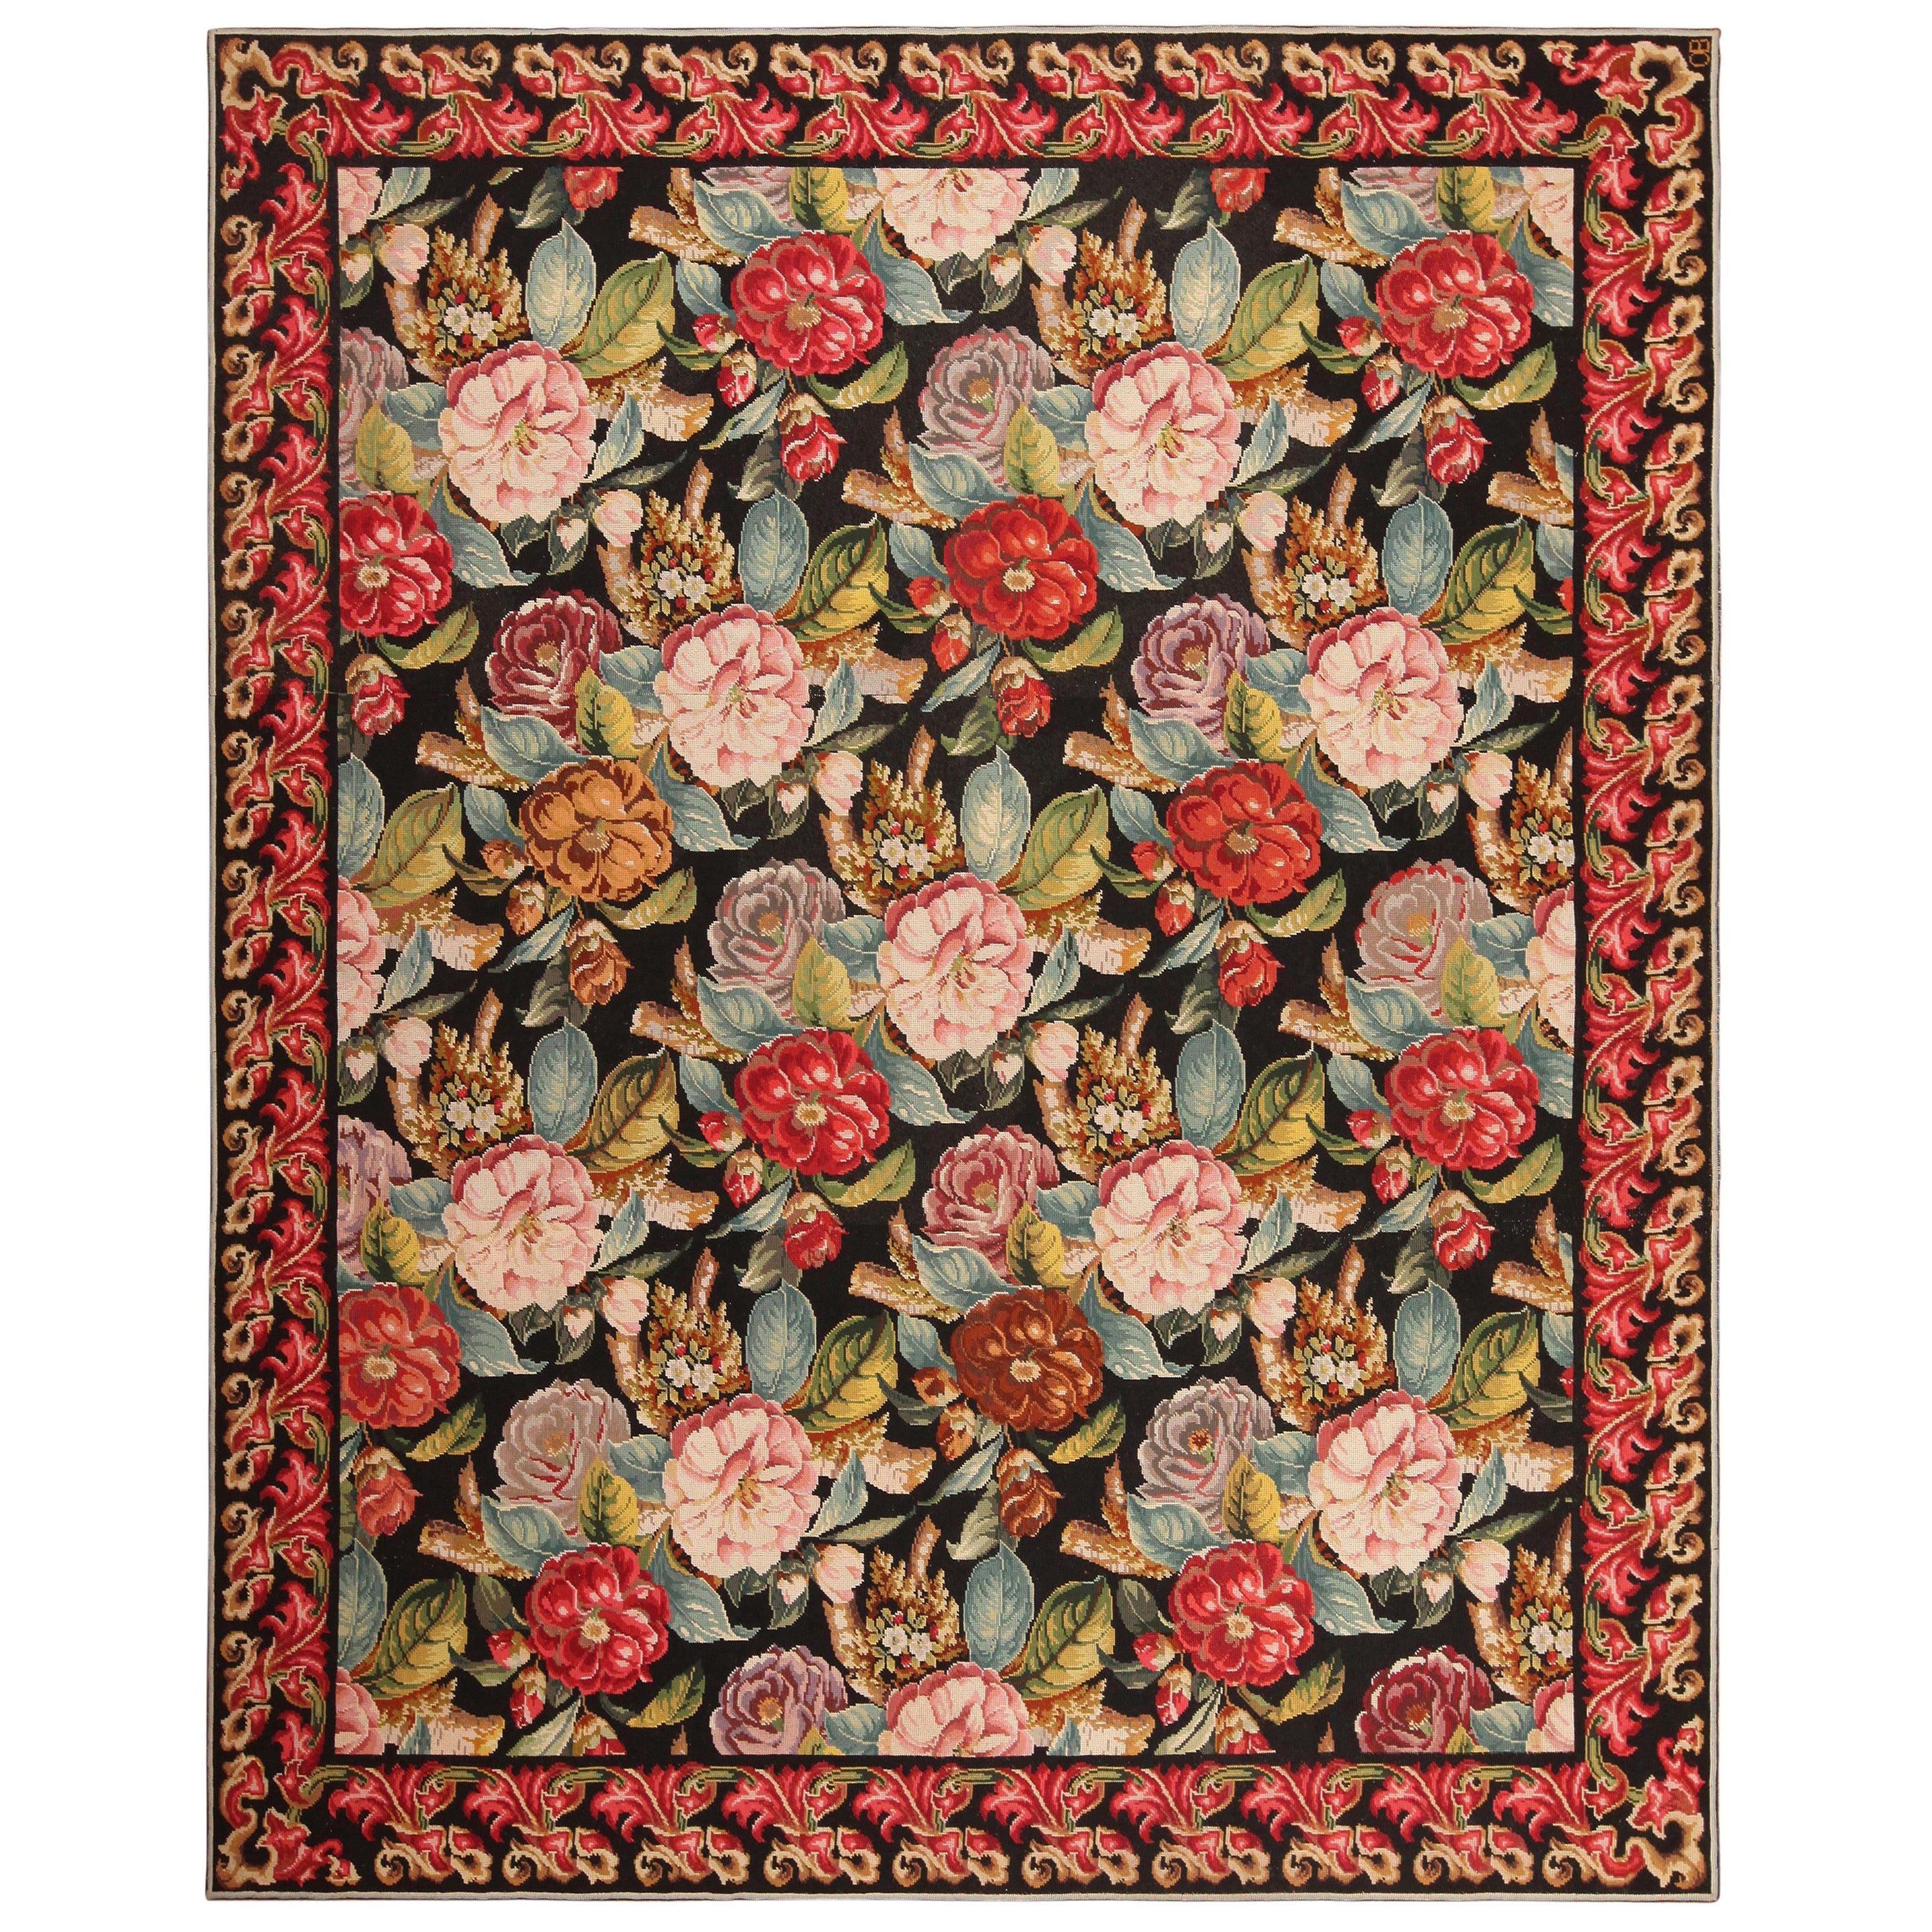 Nazmiyal Collection Antique English Needlepoint Rug. 8 ft 8 in x 10 ft 5 in